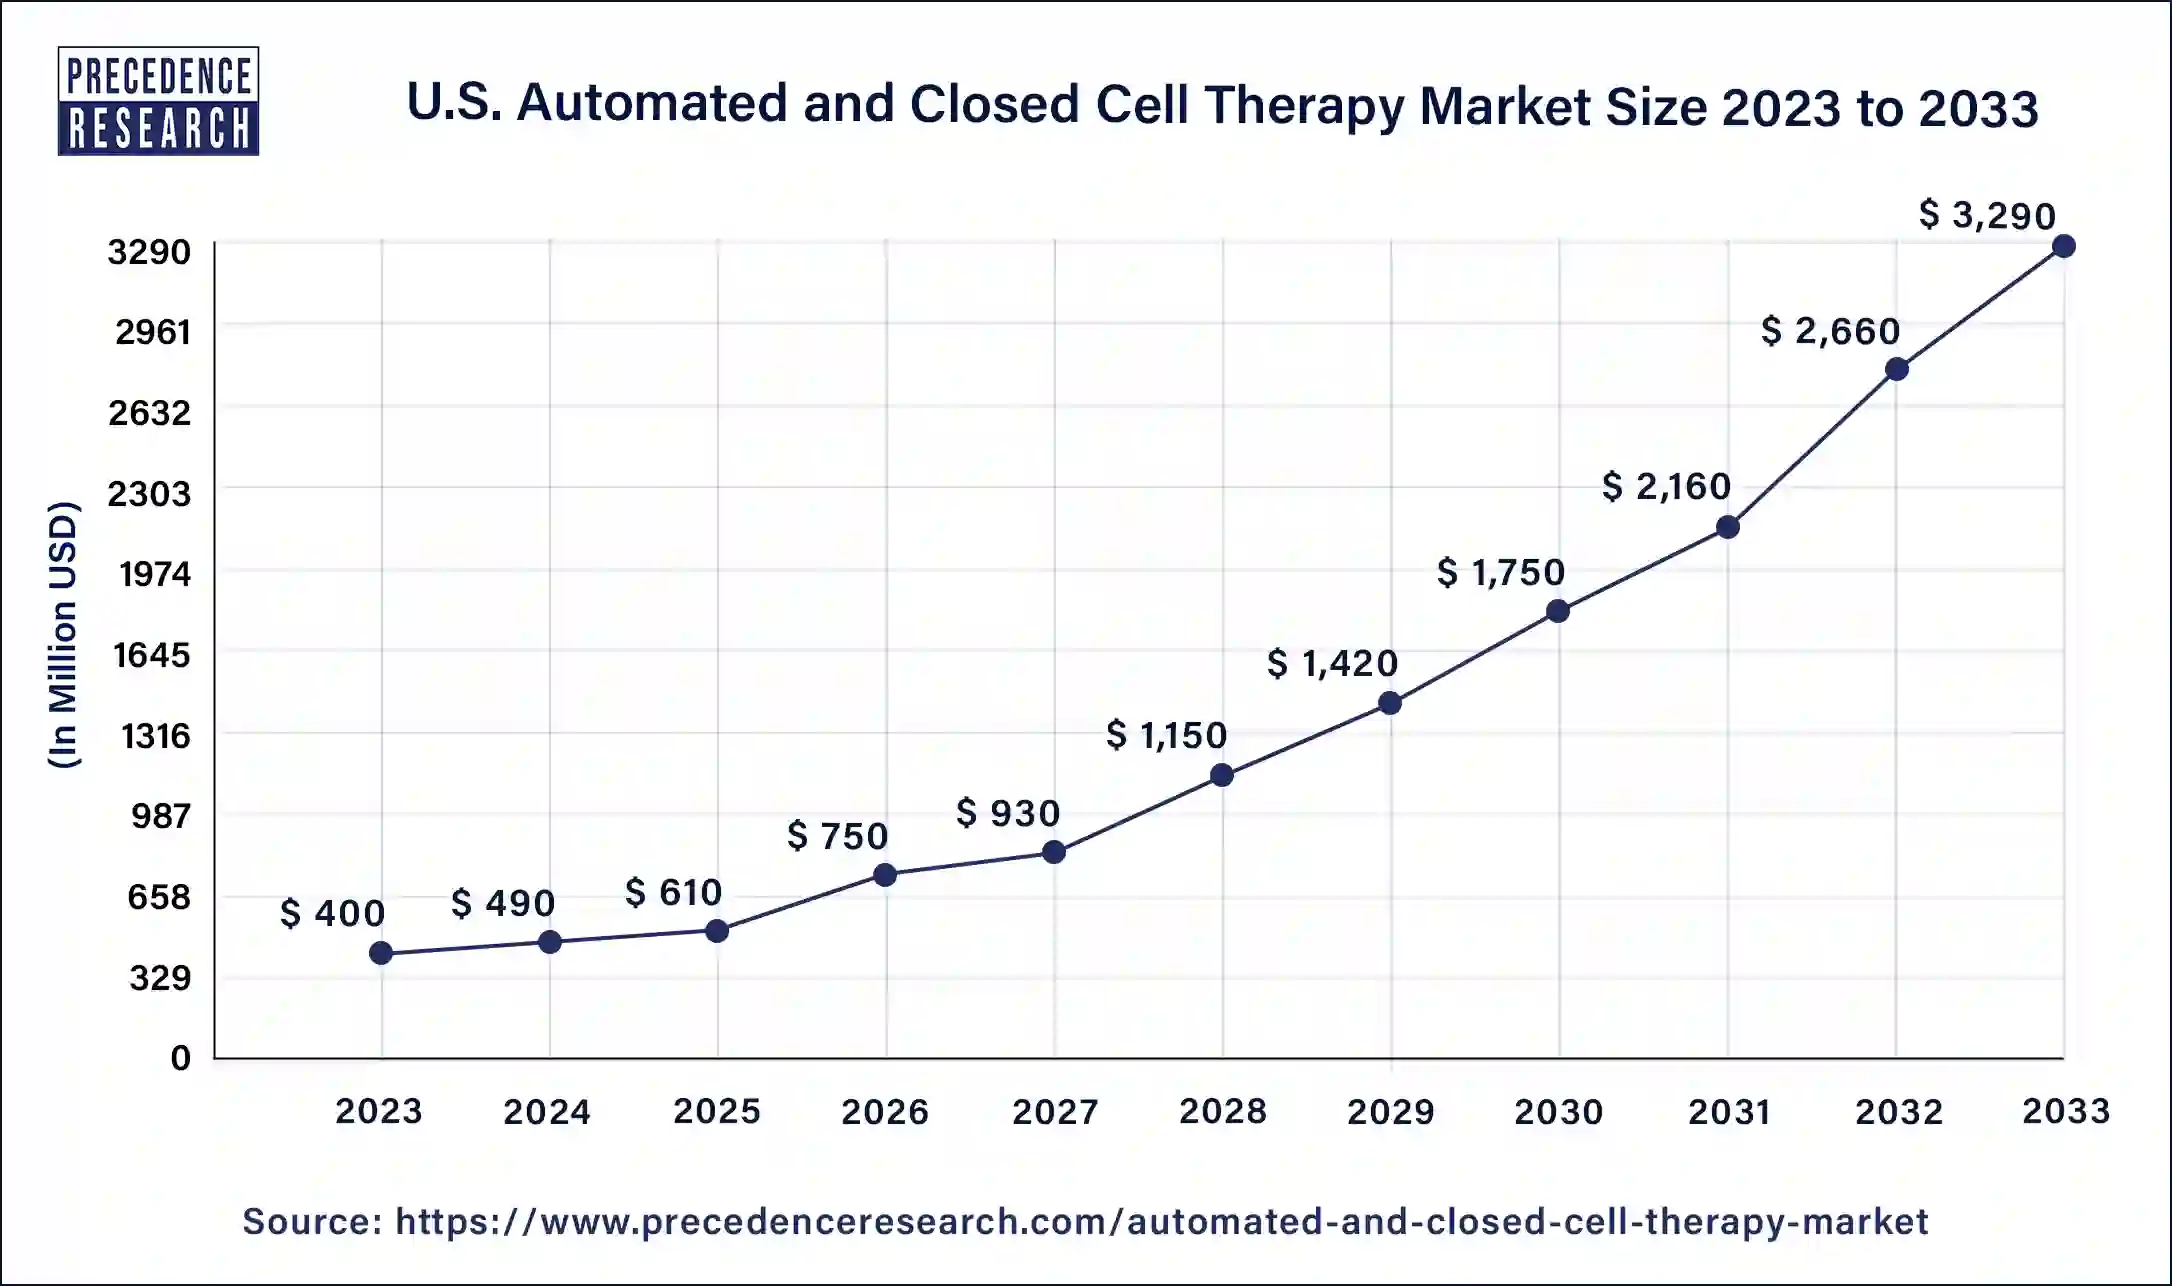 U.S. Automated and Closed Cell Therapy Market Size 2024 to 2033